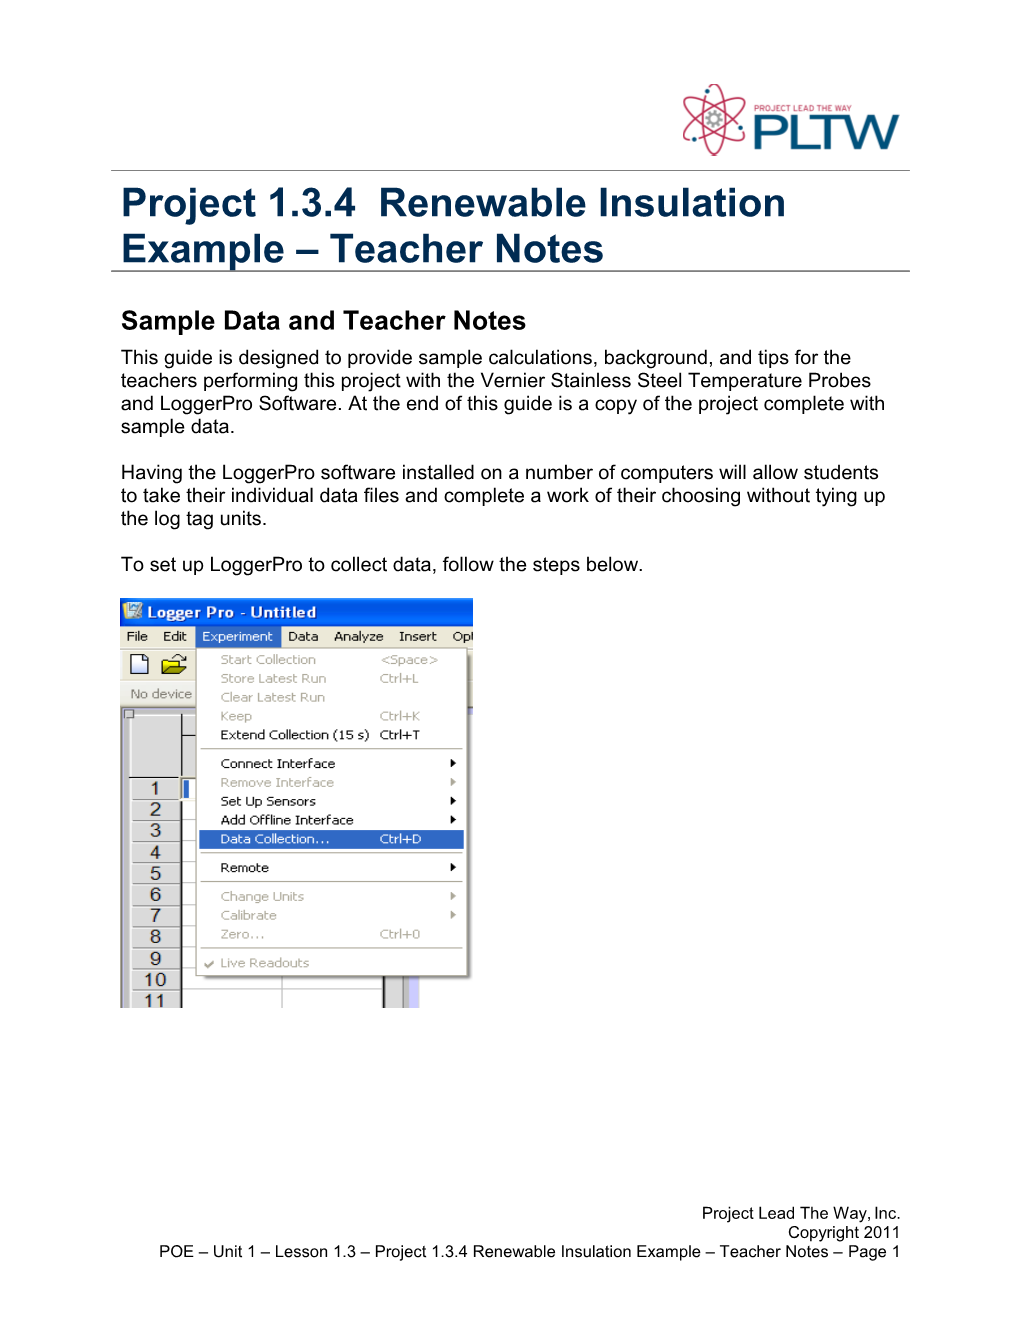 Project 1.3.4 Renewable Insulation R-Value